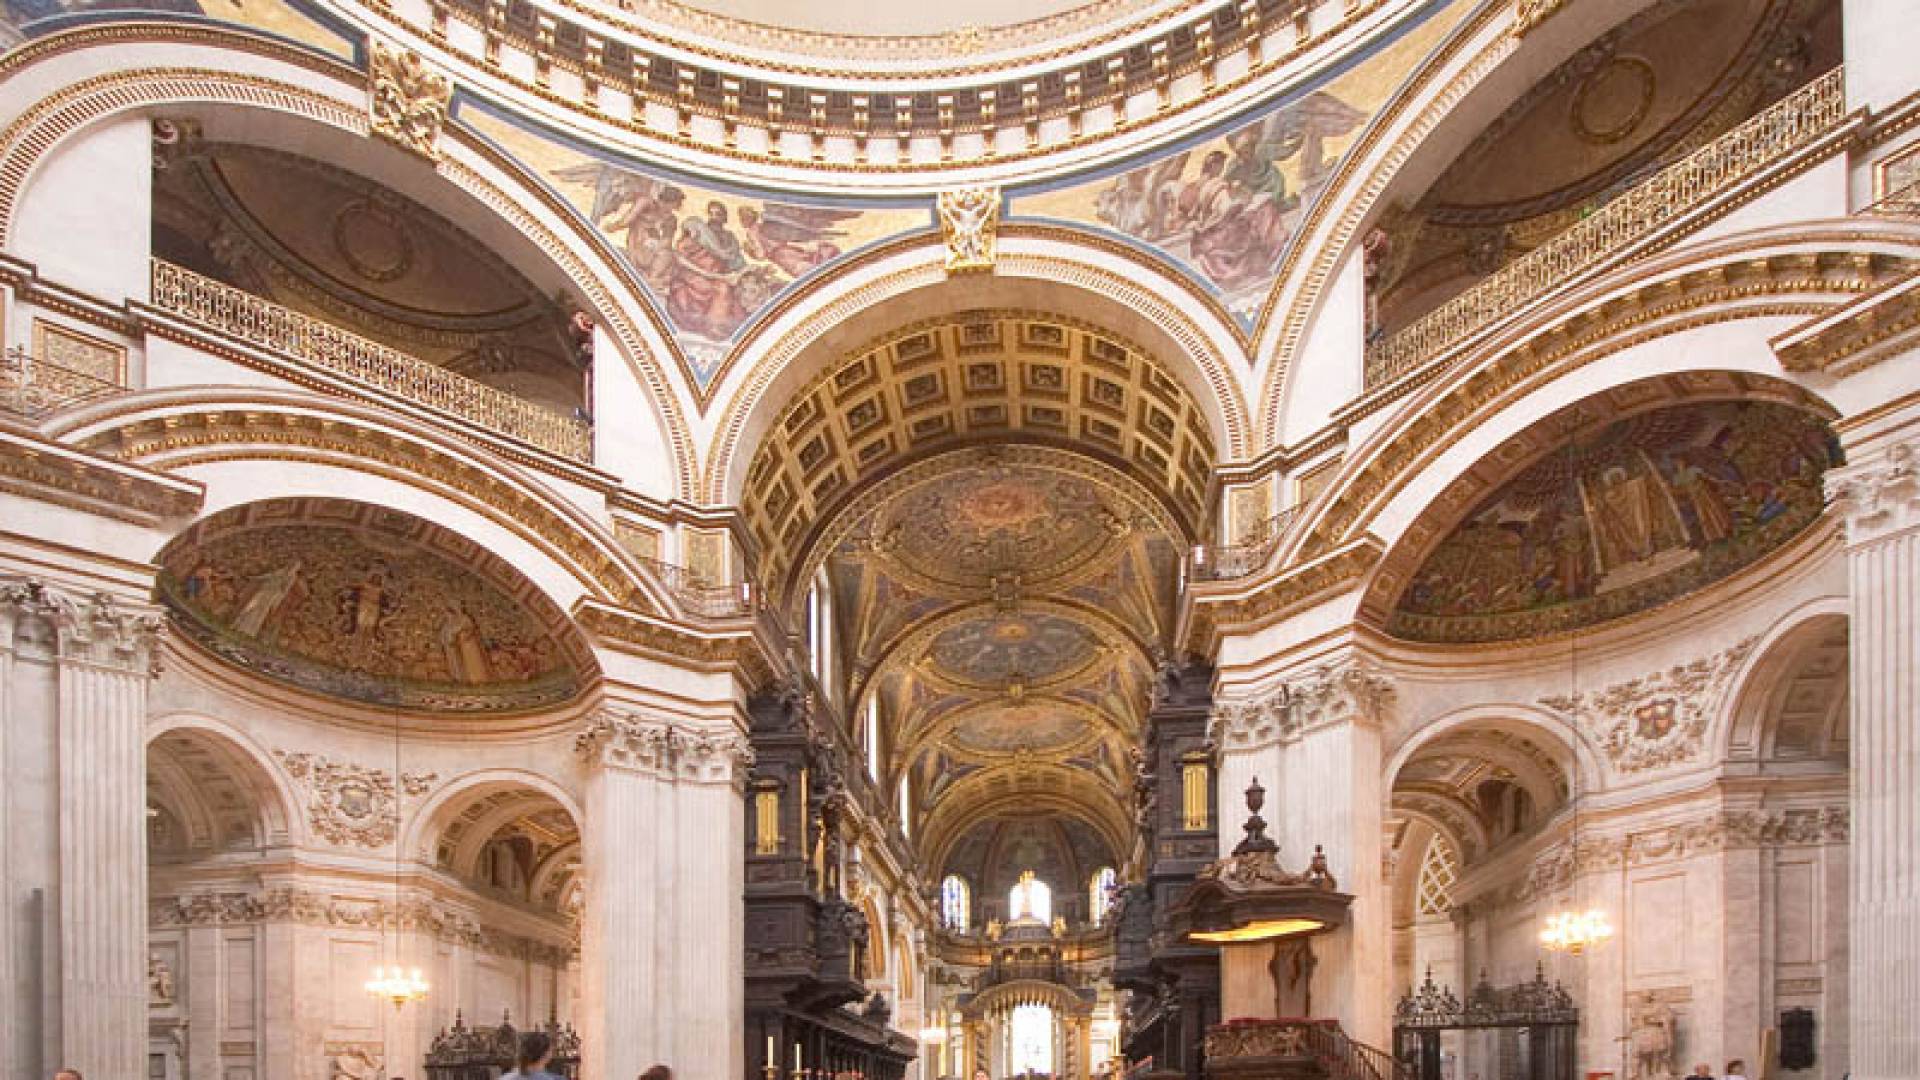 SAINT PAUL'S CATHEDRAL, Interno